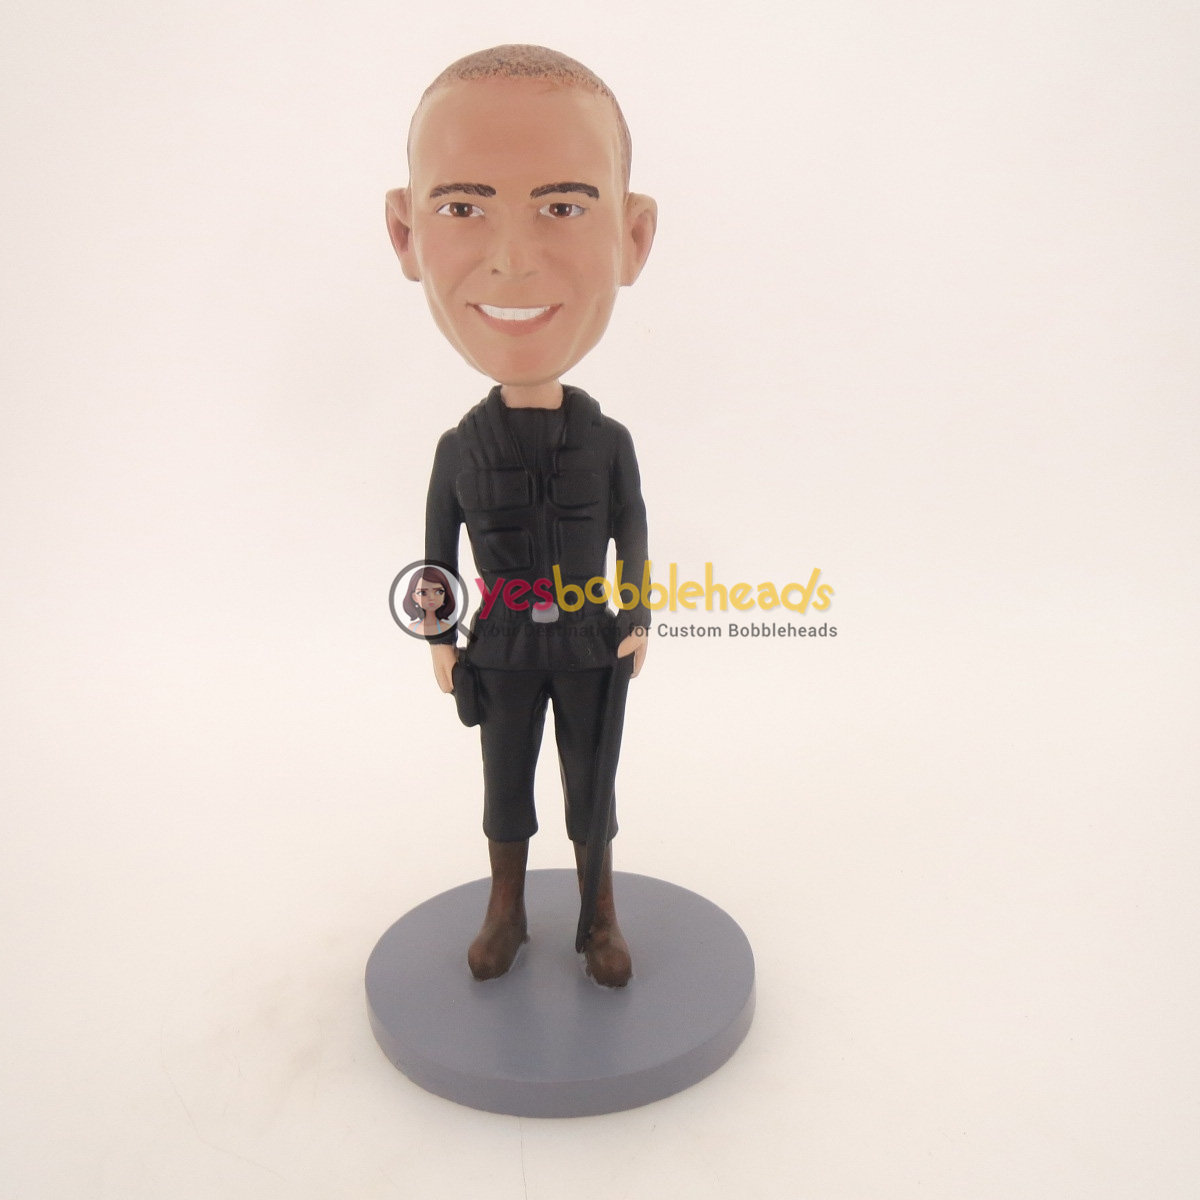 Picture of Custom Bobblehead Doll: Military Armed Man In Black